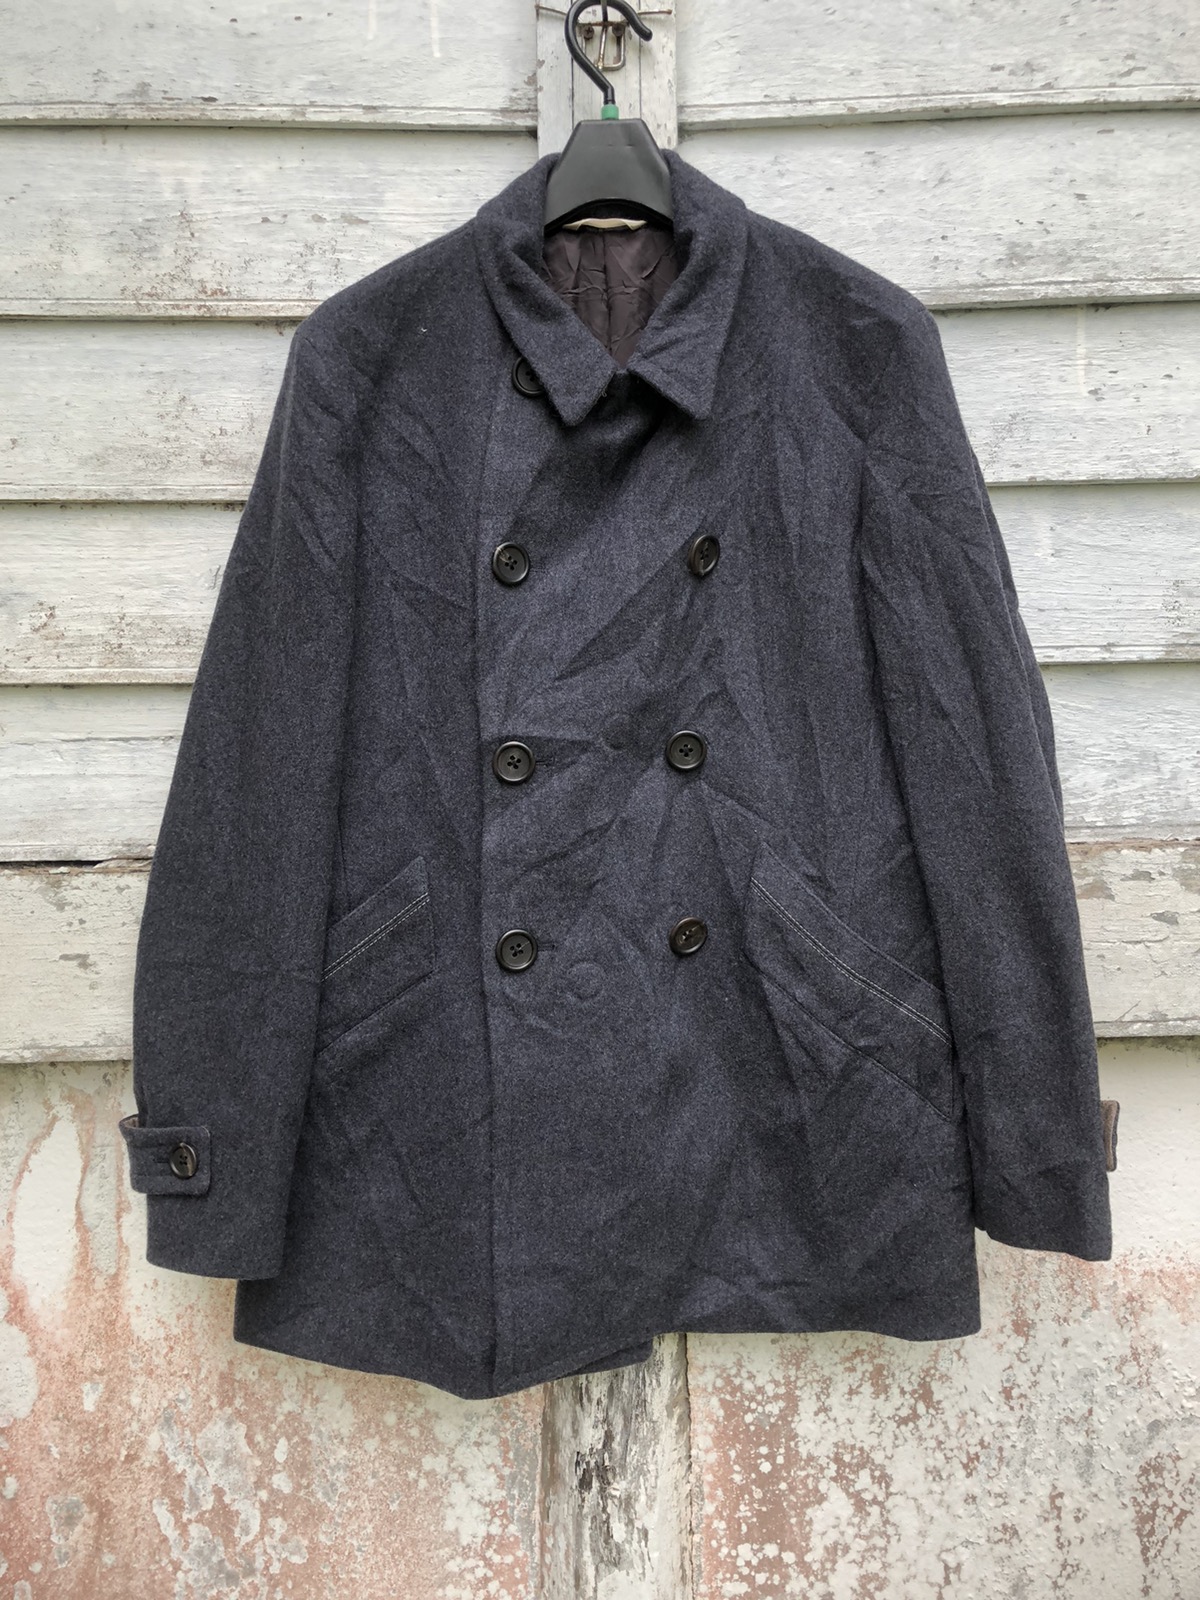 Paul Smith Collection Coat - 1